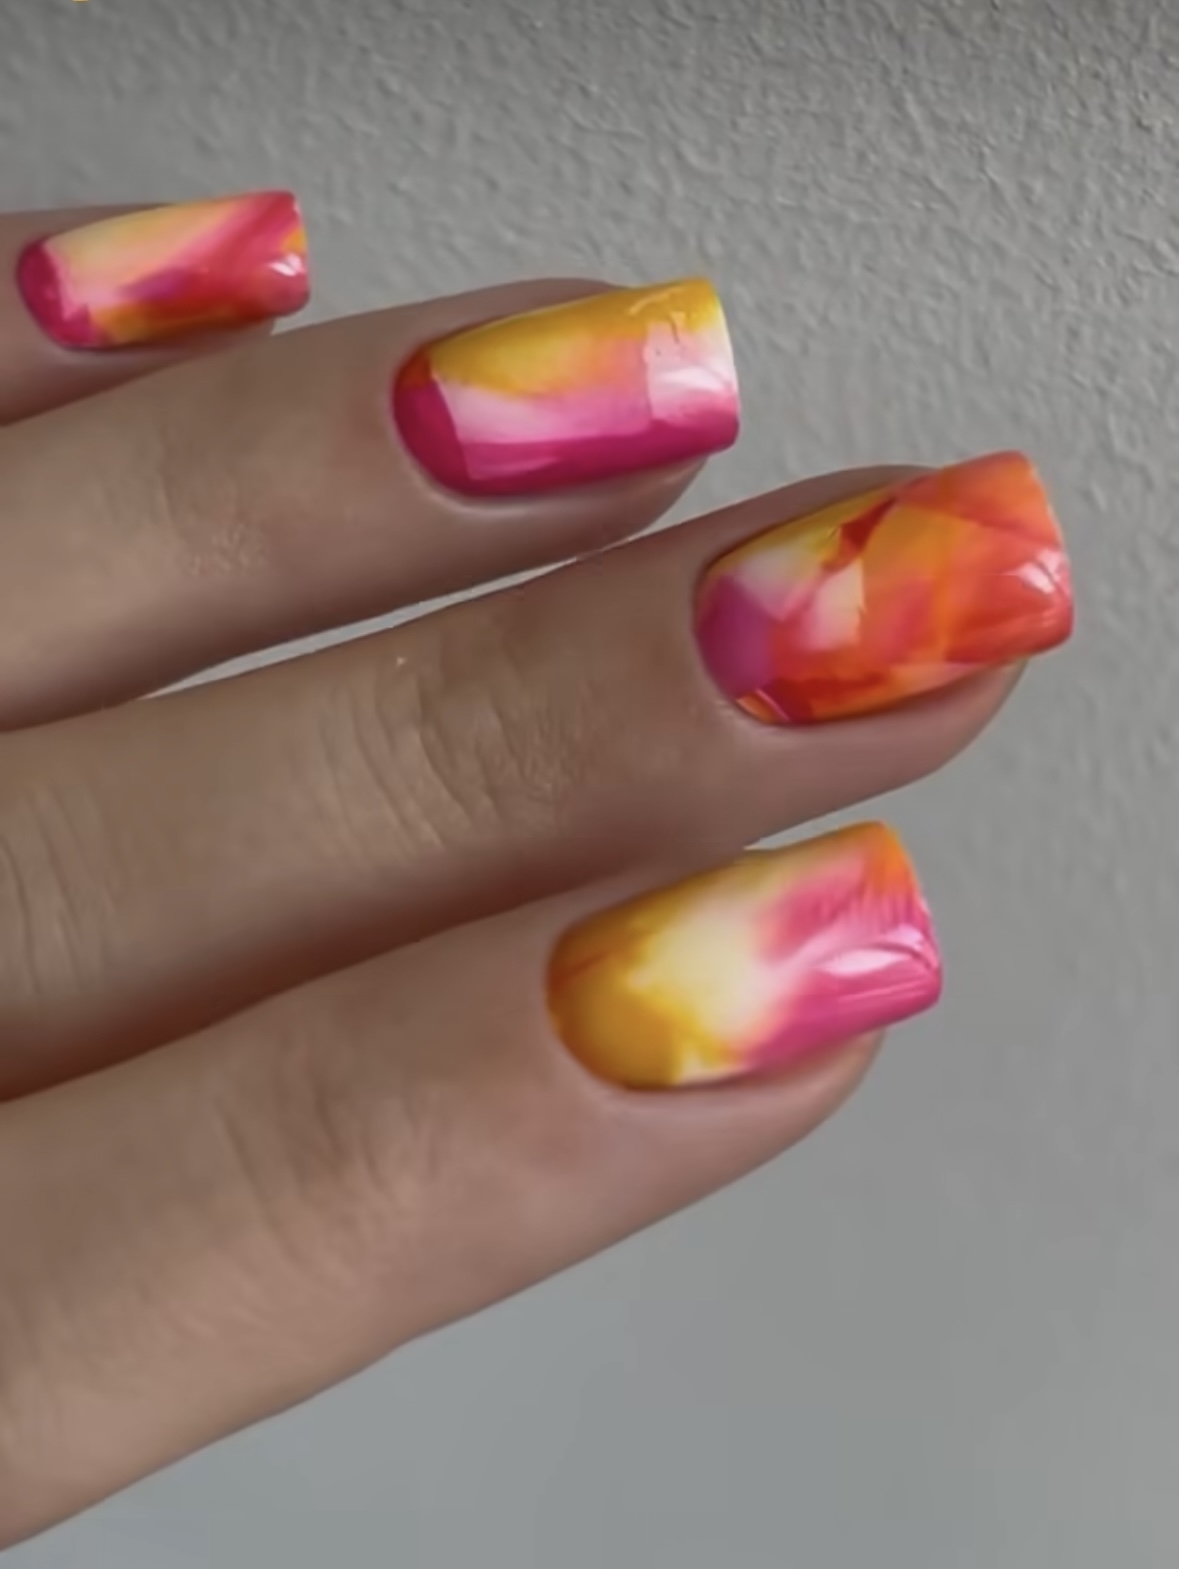 Close-up of a hand with nails featuring a marbled design in shades of pink and yellow